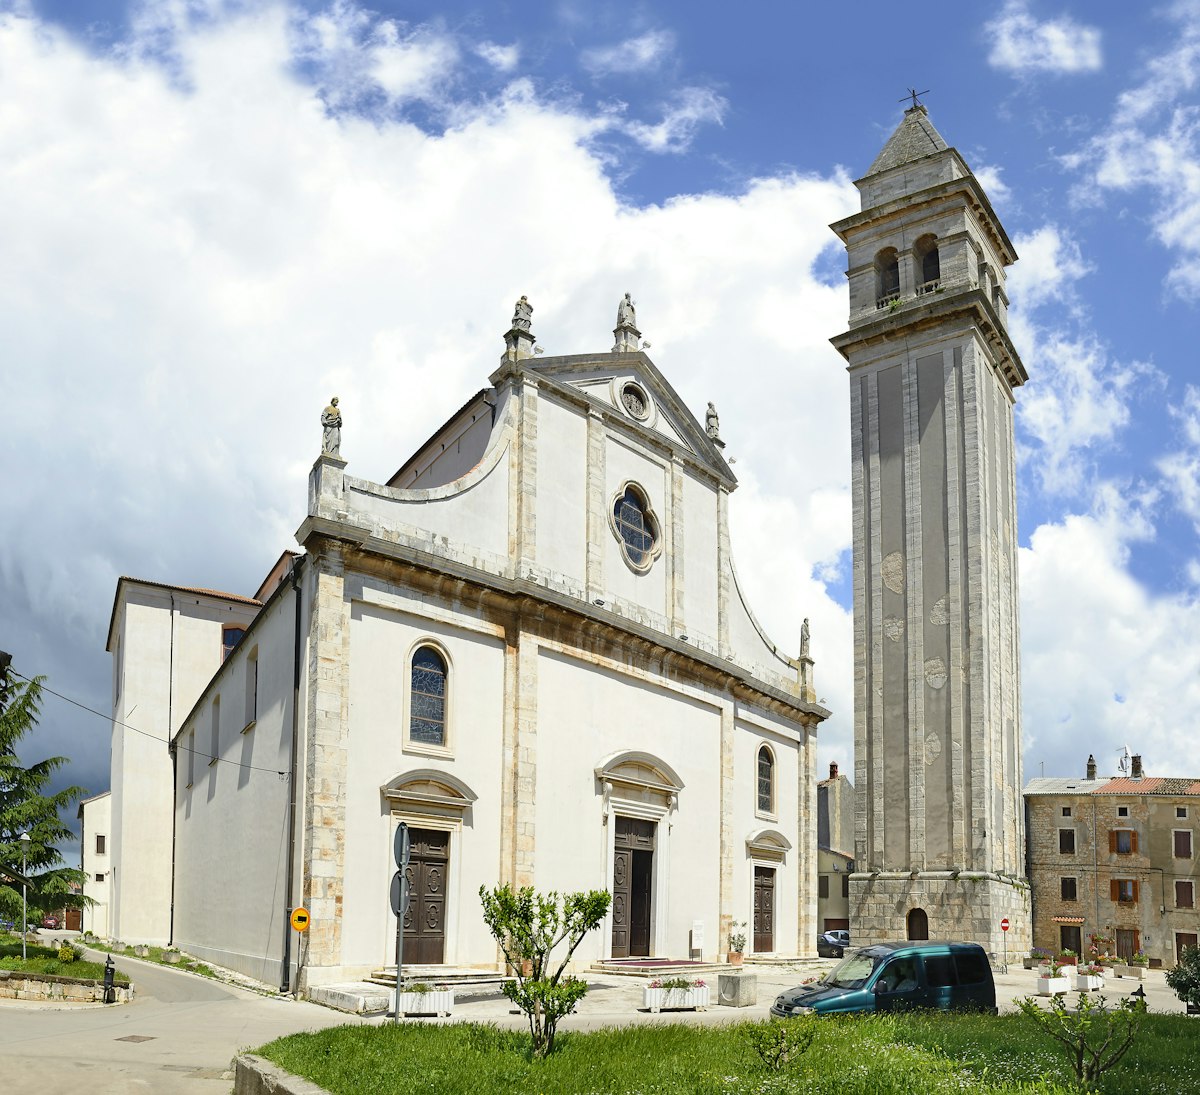 VODNJAN, CROATIA - MAY 8: Church of St. Blaise and bell tower on May 8, 2014. Vodnjan or Dignano is a old town in Istria County, situated 10 km north of Pula ; Shutterstock ID 193015502; Your name (First / Last): Anna Tyler; GL account no.: 65050; Netsuite department name: Online Editorial; Full Product or Project name including edition: destination-image-southern-europe